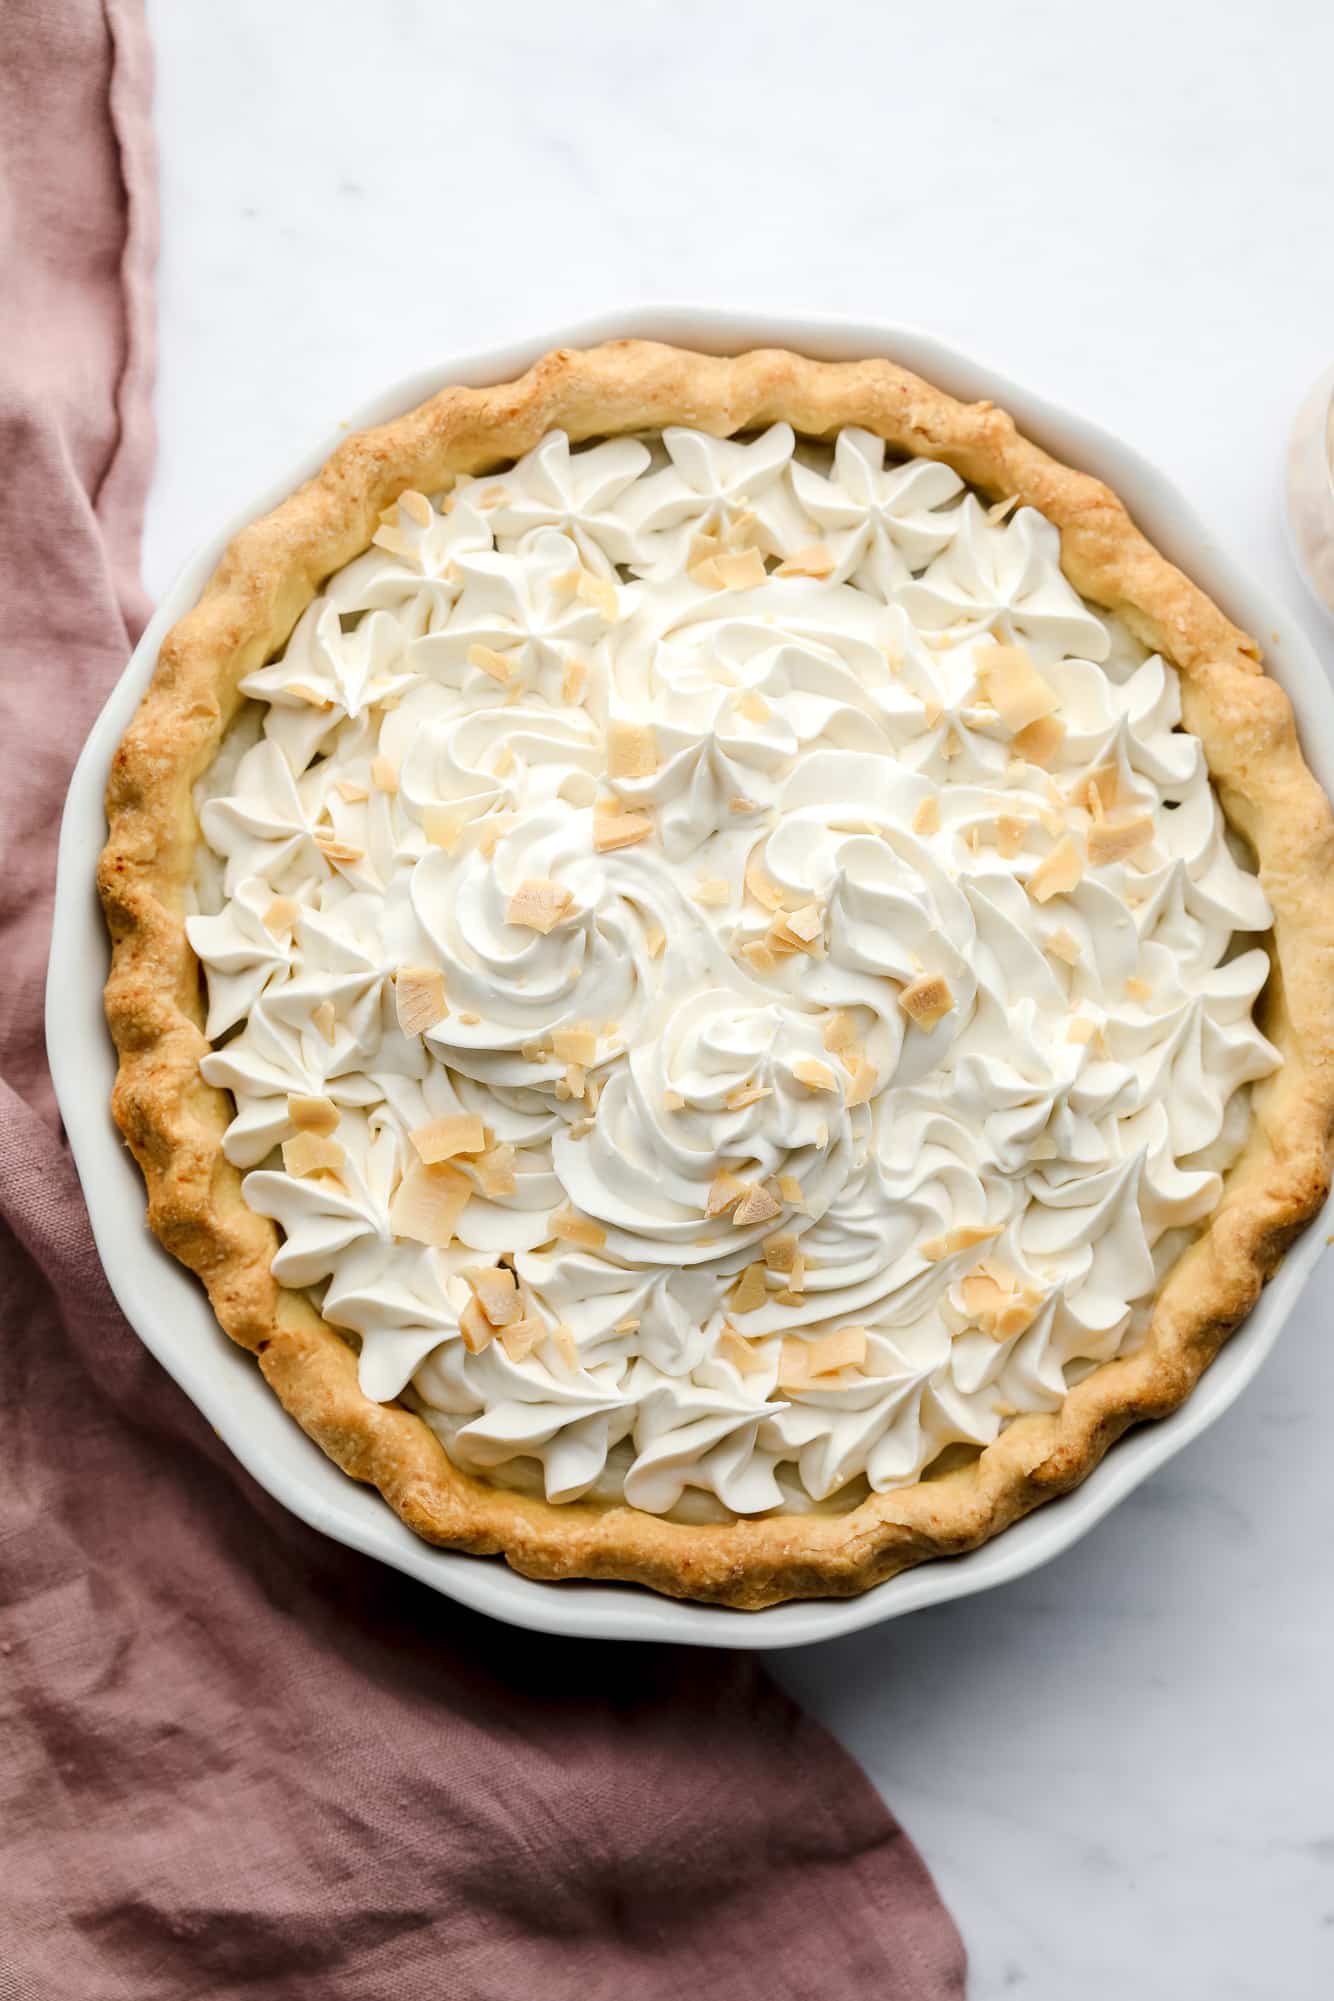 baked vegan coconut cream pie with whipped cream and toasted coconut shreds on top.